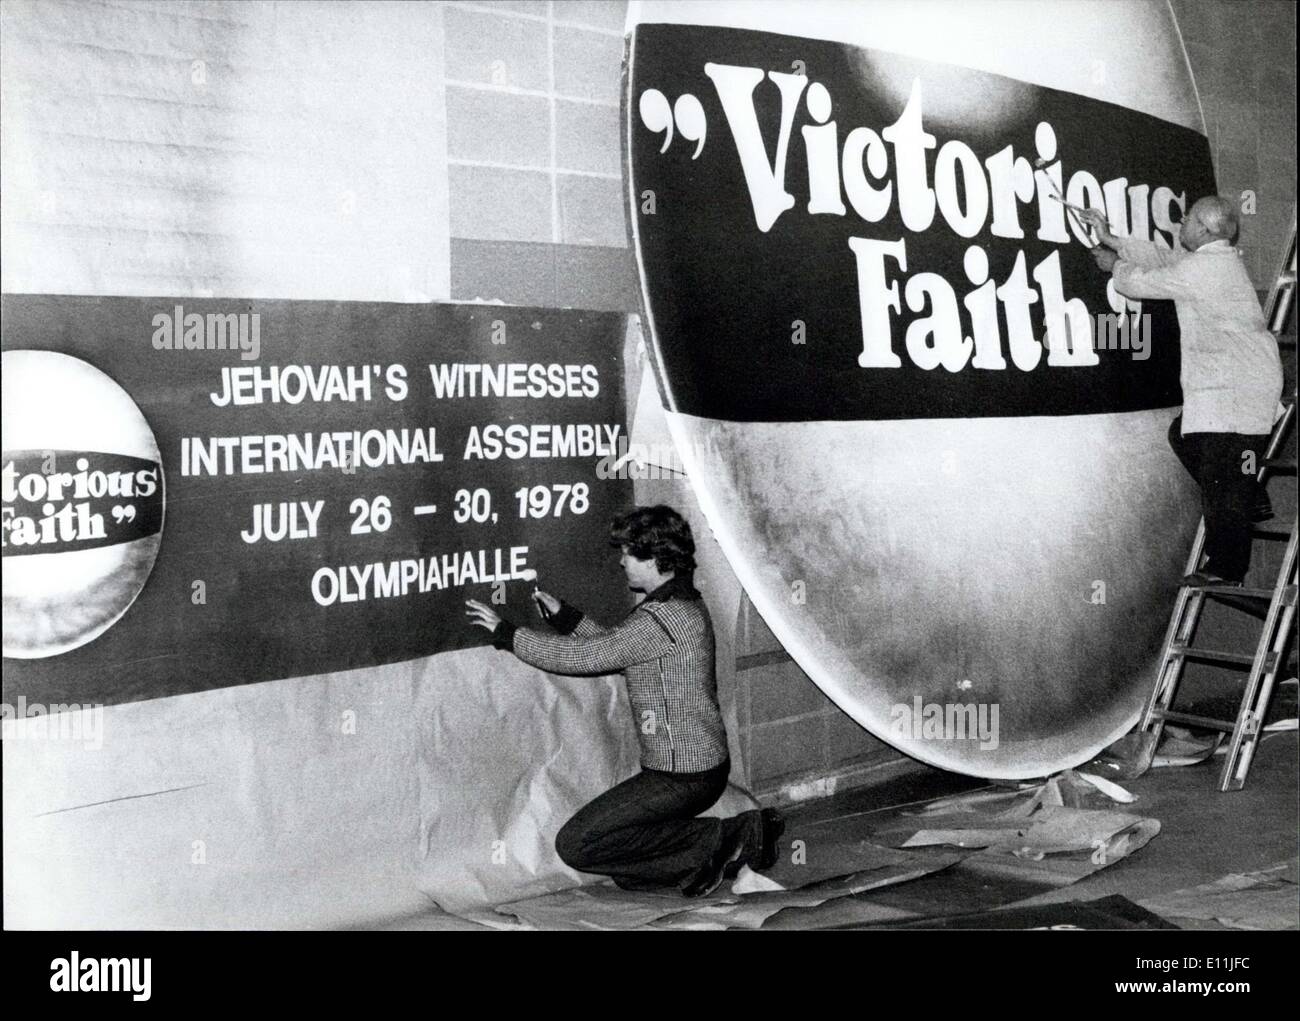 Jul. 30, 1978 - International Assembly Of Jehovah's Witnesses In Munich/West Germany: ''Victorious Faith'' this is the motto of Stock Photo